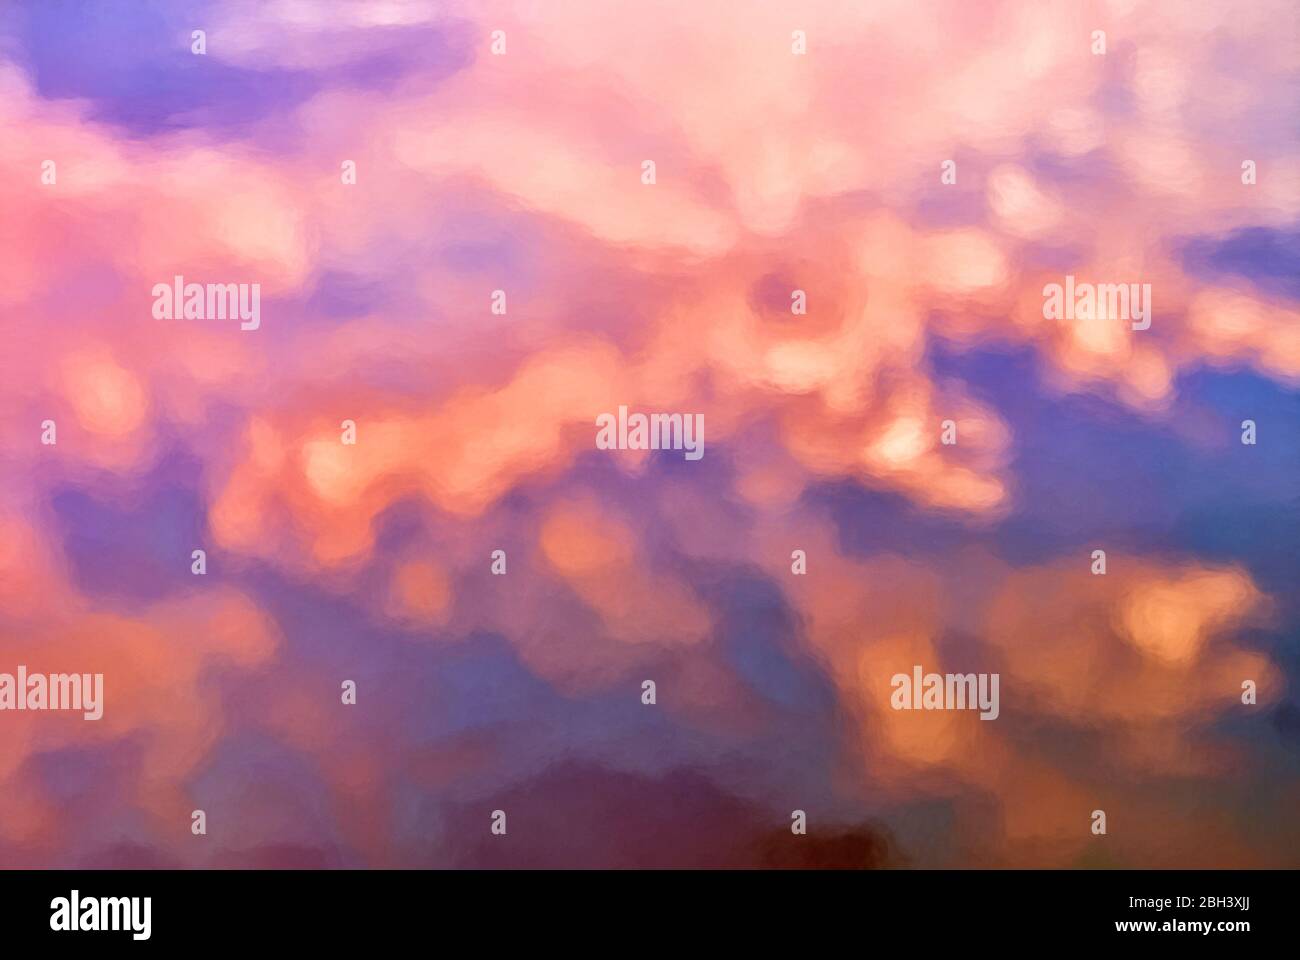 A multi colored blurred abstract background. This is computer generated art. Stock Photo